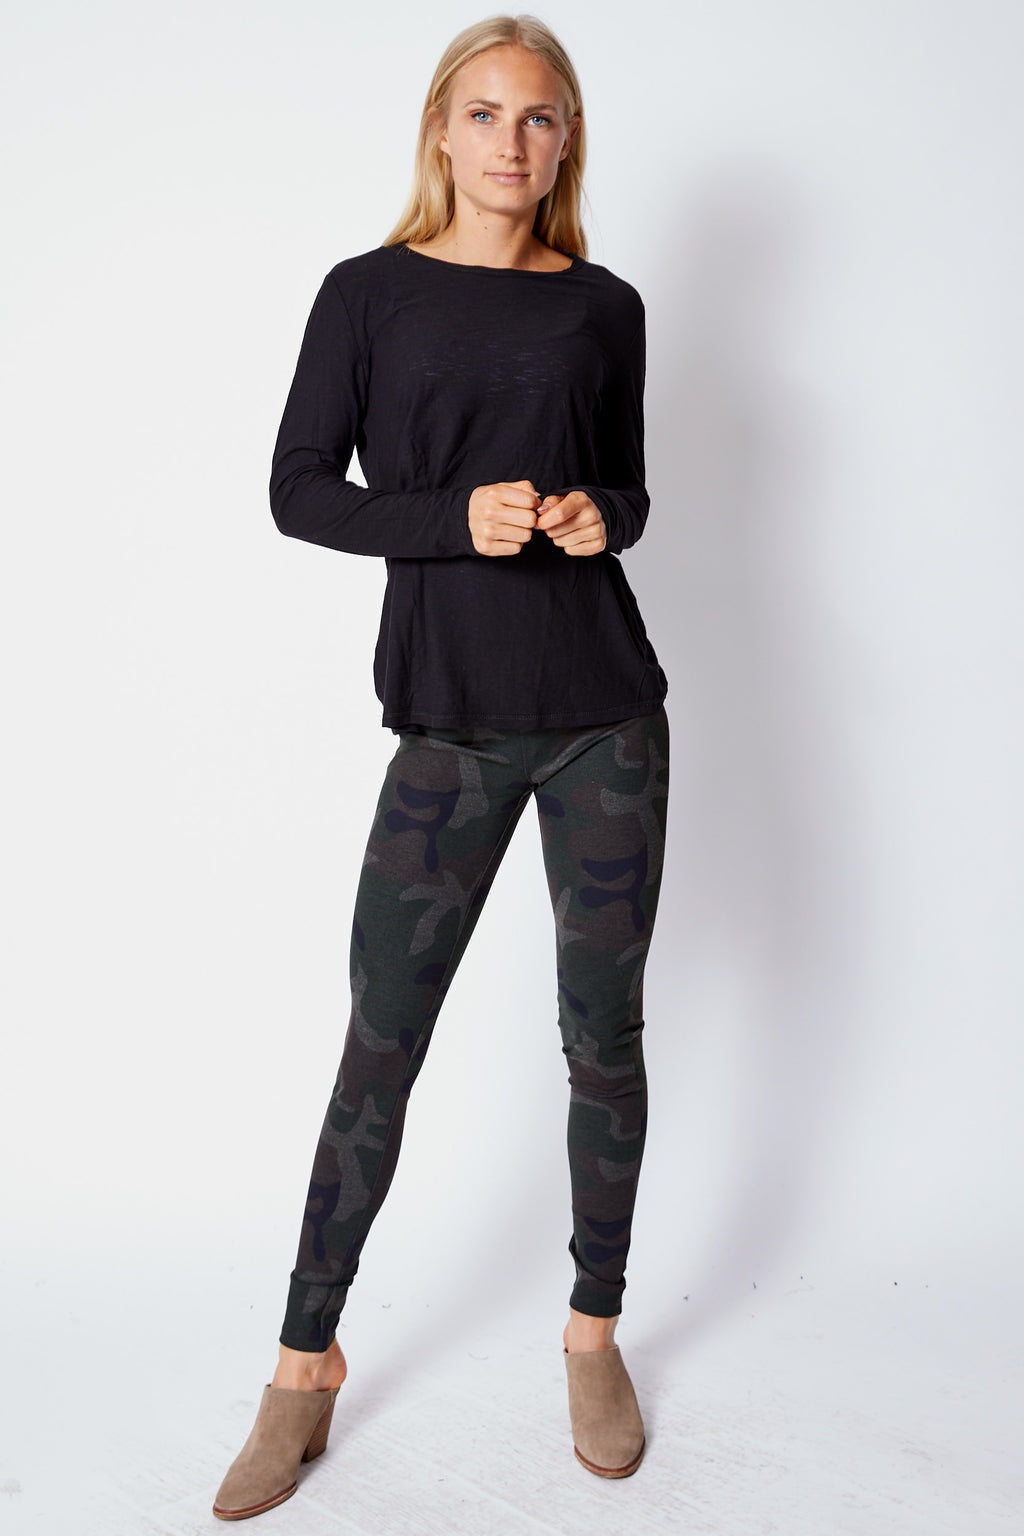 Leggings Lose 10 Lbs (Solid Colors) – Jacqueline B Clothing